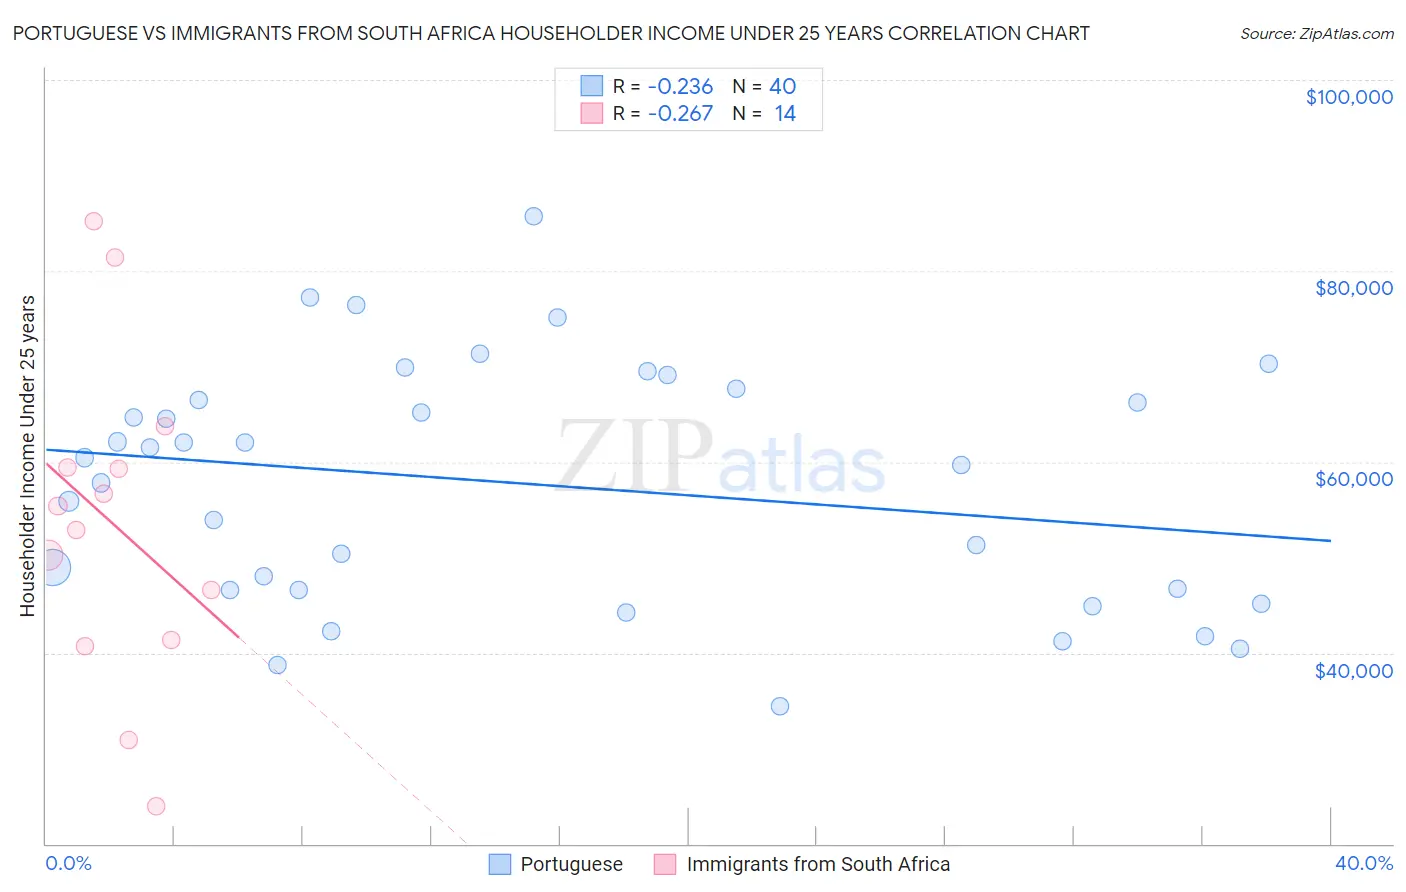 Portuguese vs Immigrants from South Africa Householder Income Under 25 years